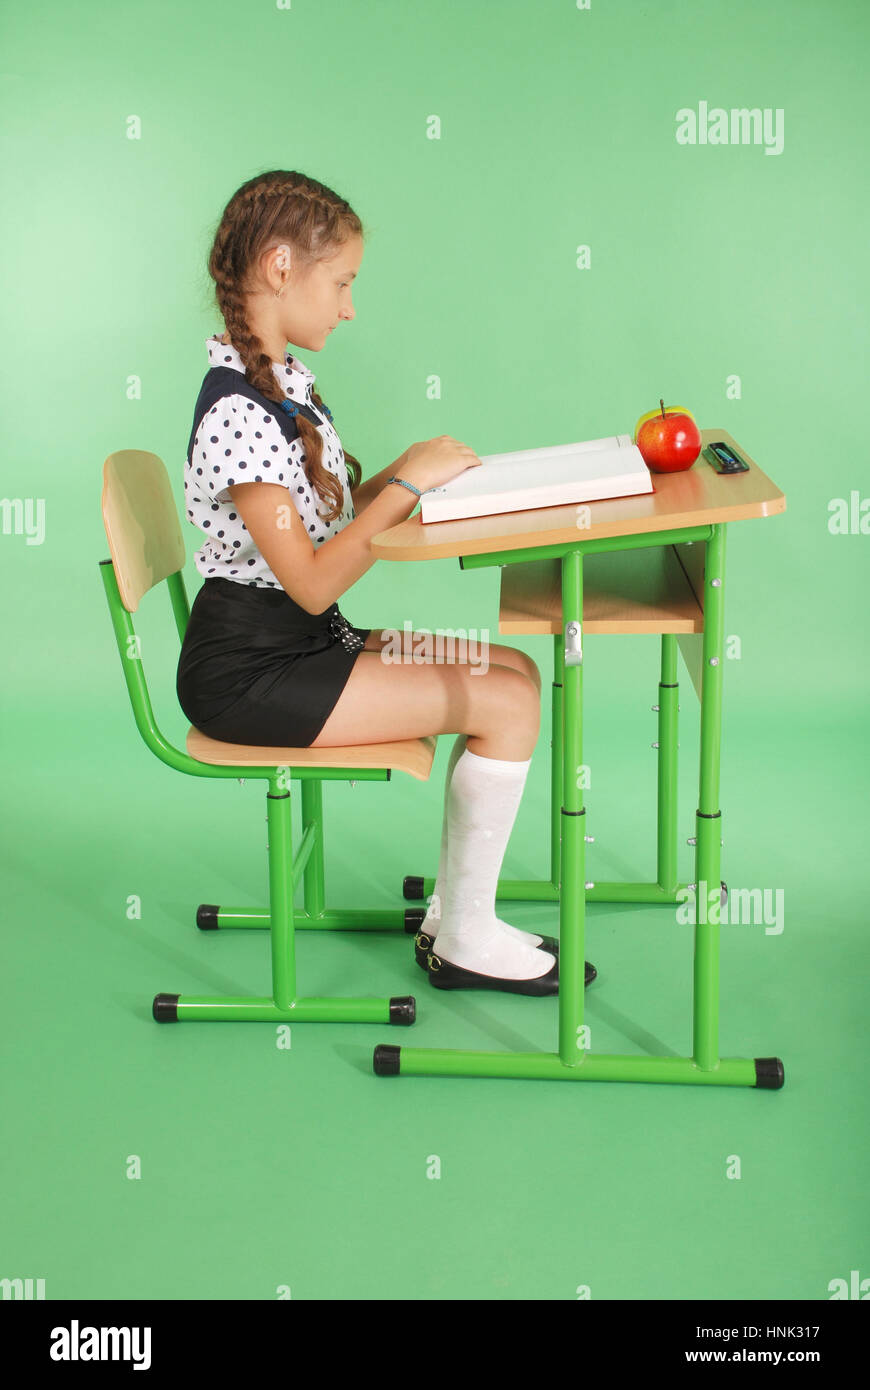 Girl in a school uniform sitting at a desk and reading a book isolated on green Stock Photo